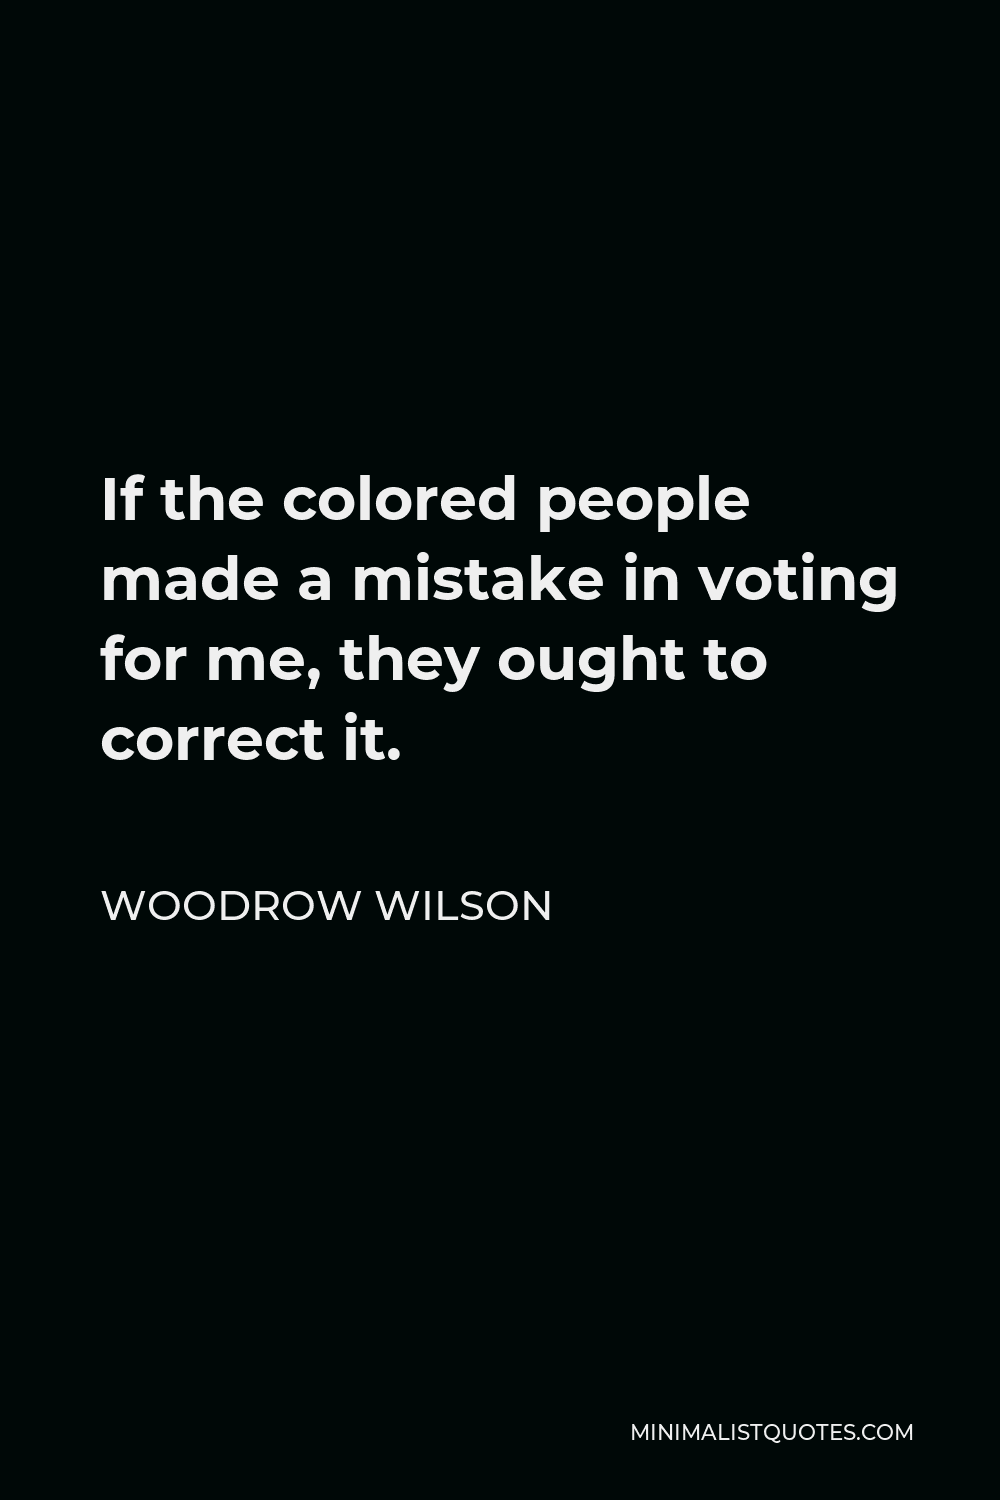 Woodrow Wilson Quote - If the colored people made a mistake in voting for me, they ought to correct it.